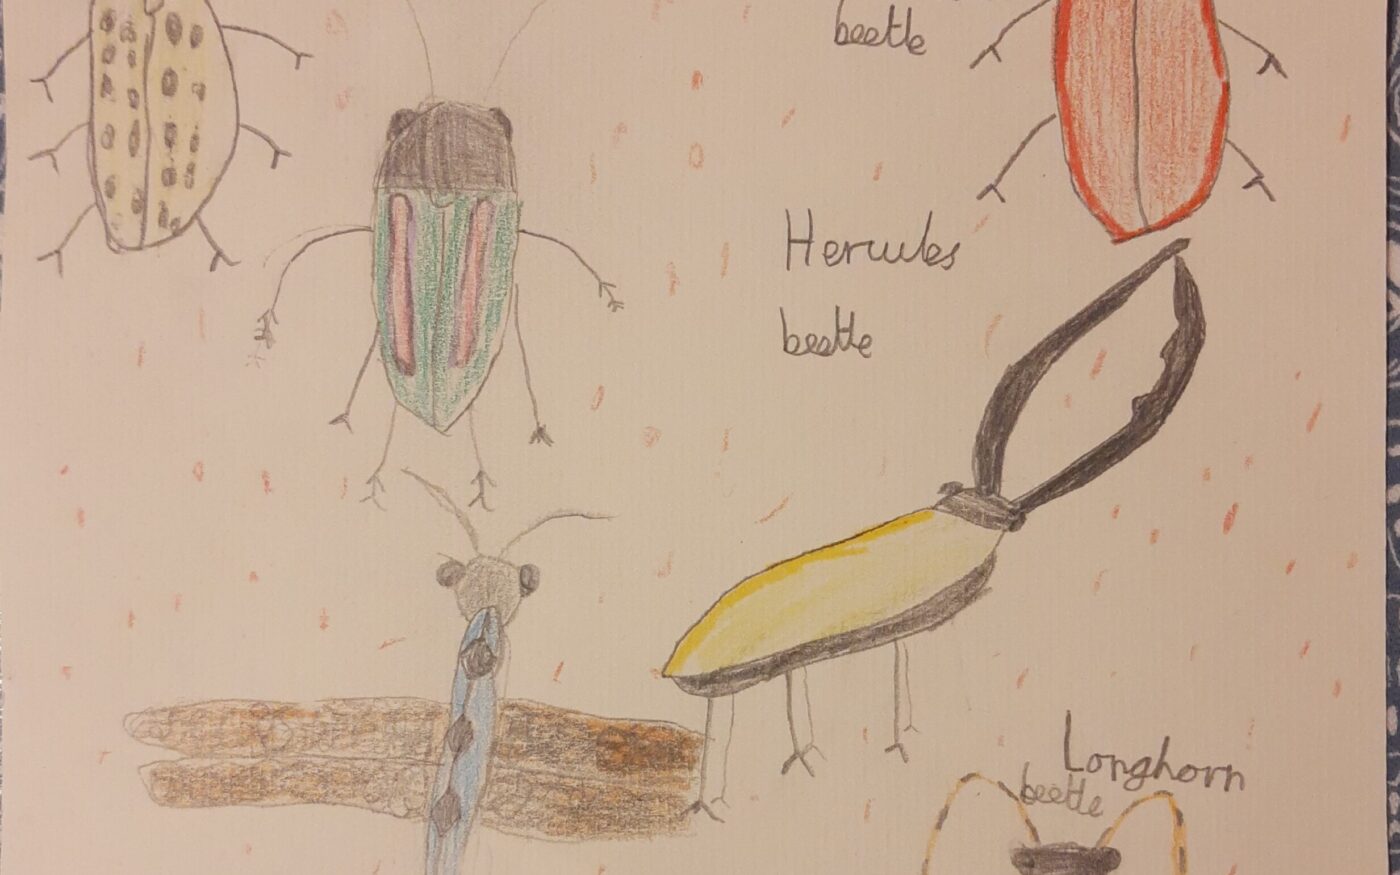 Beetles and Bugs by Amelia Dix, Highly Commended in 8-12 category, Insect Week 2022 art competition